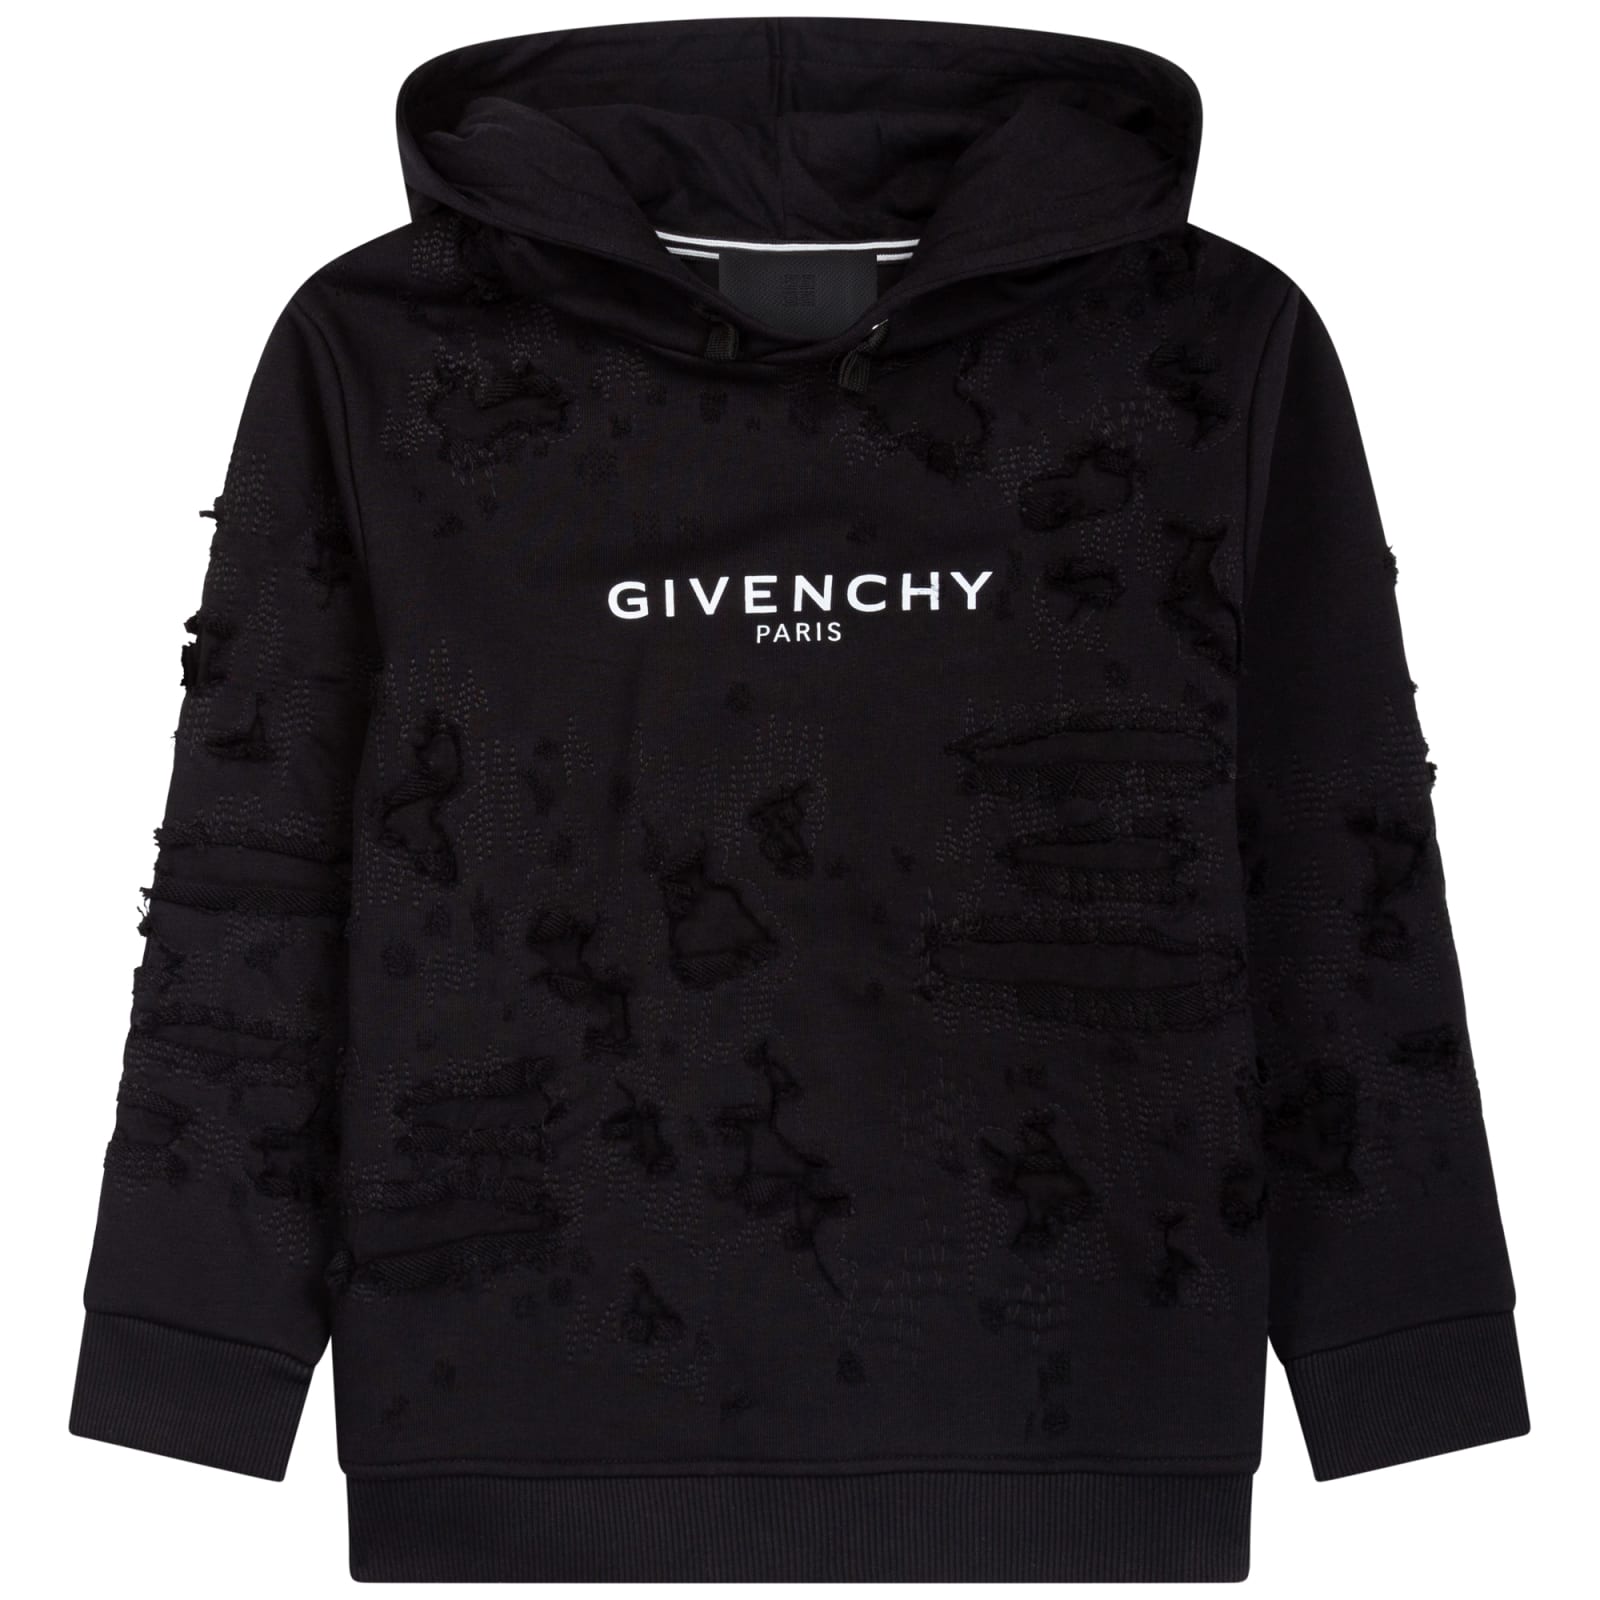 Givenchy Sweatshirt With Worn Effect